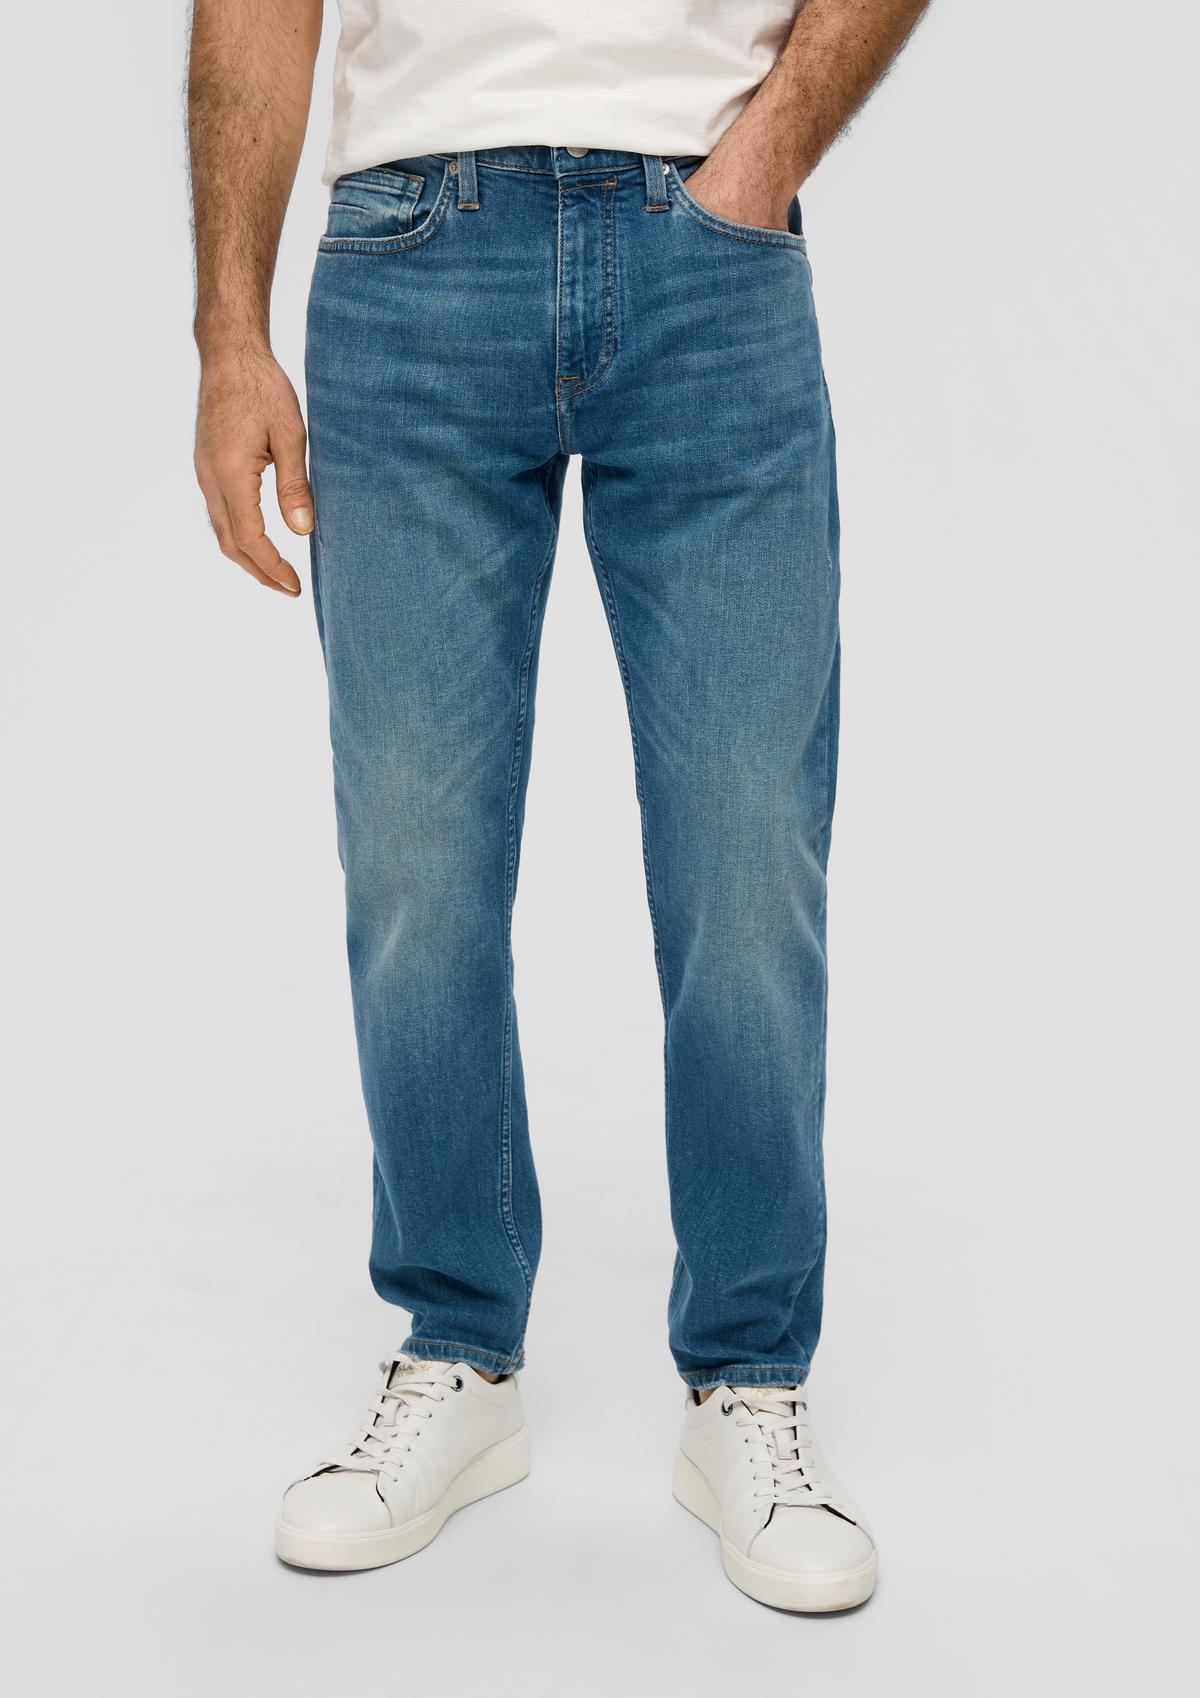 s.Oliver Jeans Mauro / Regular Fit / Hight Waist / Tapered Leg